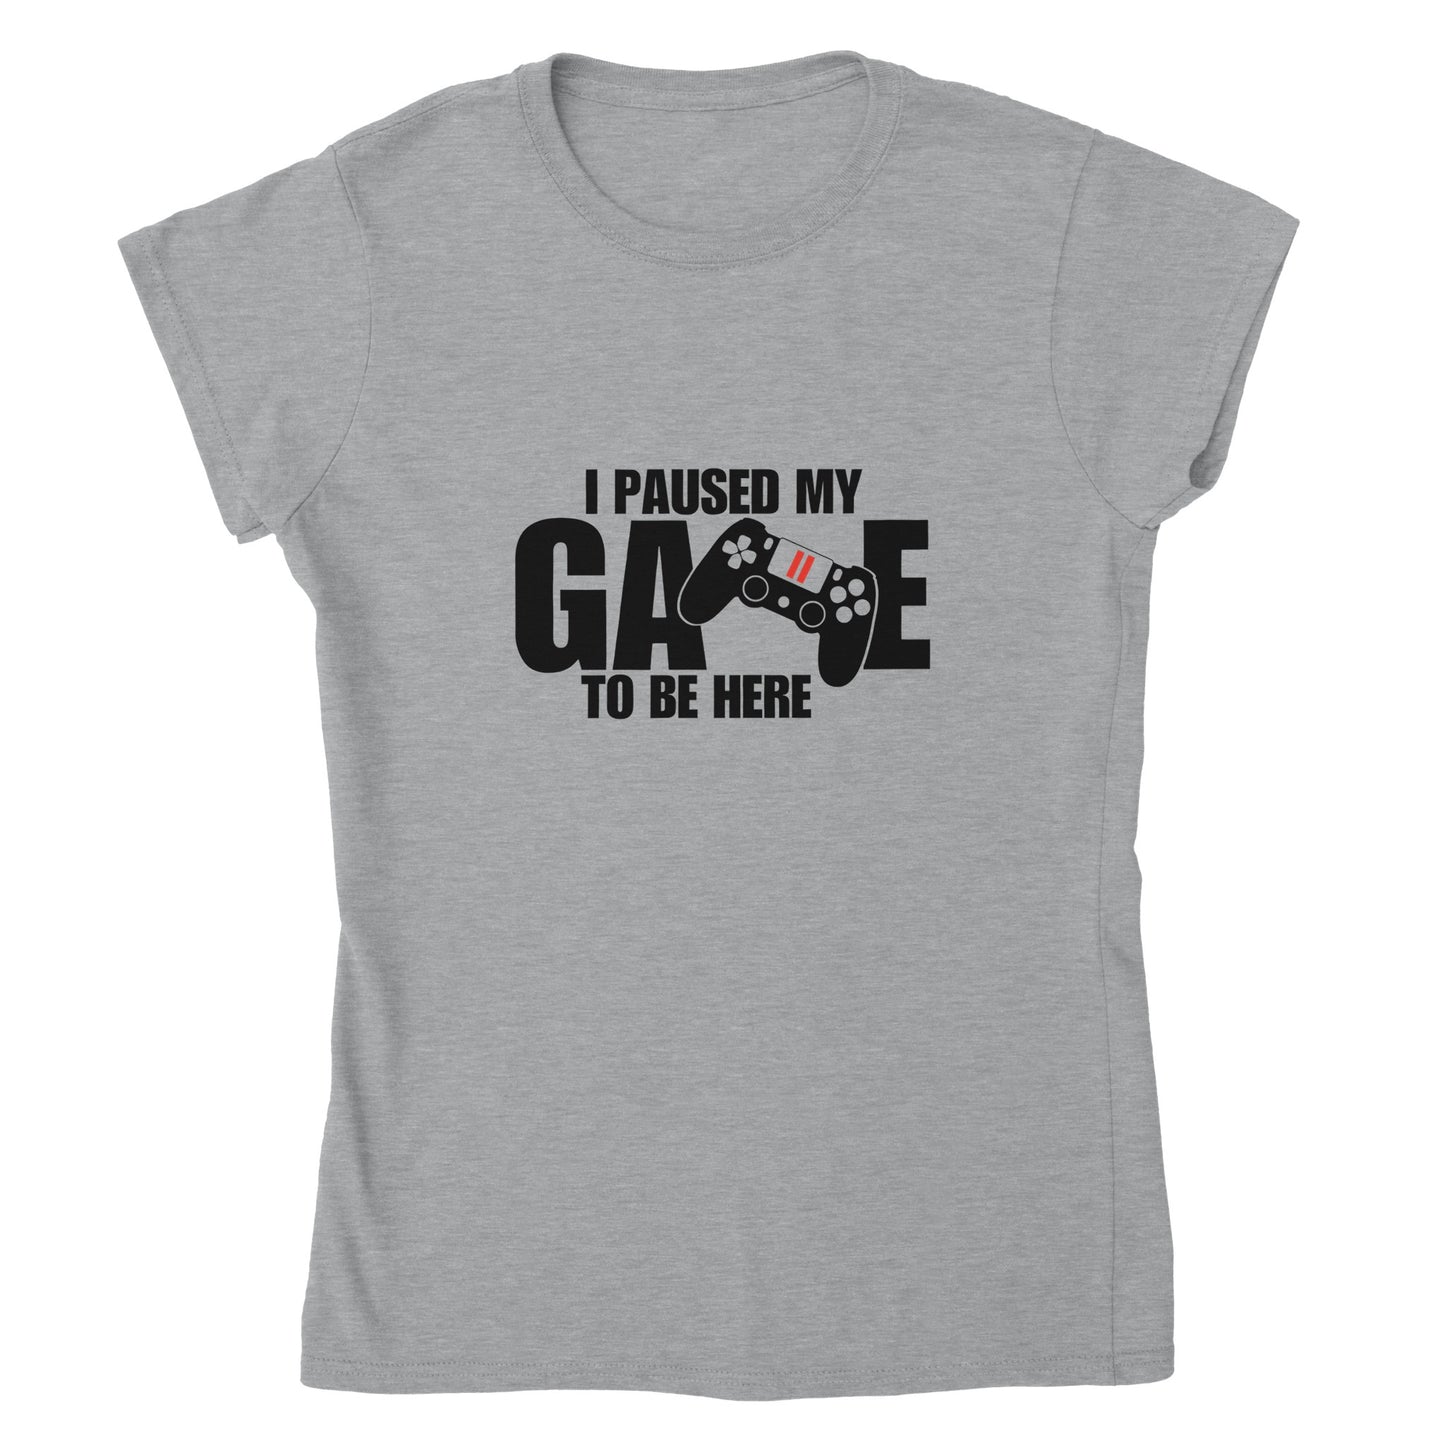 Women Crewneck T-shirt I paused my Game to Be Here, Funny Shirt, Gamer Gift, Funny Gaming Shirt, Gaming T-Shirt, Funny T-shirt